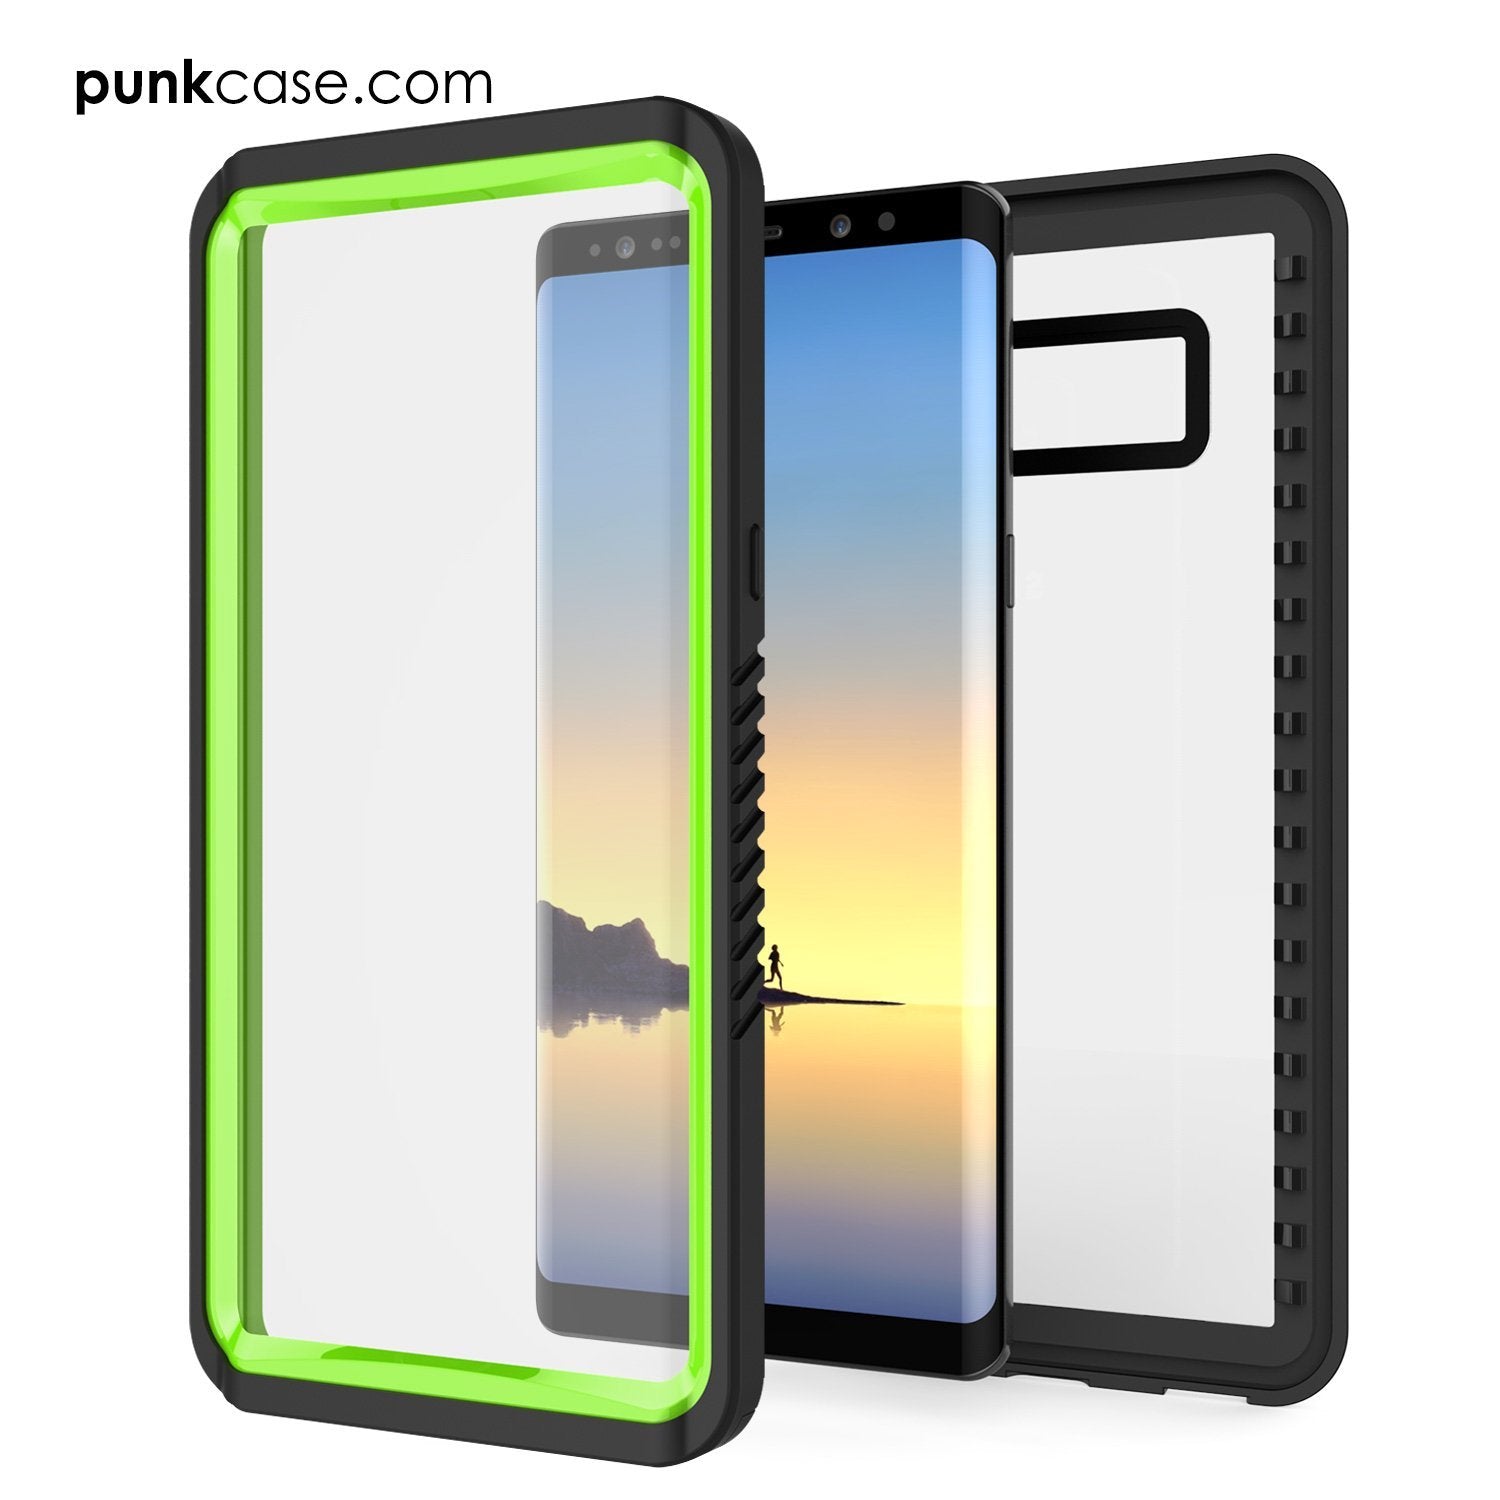 Galaxy Note 8 Waterproof Case, Punkcase [Extreme Series] [Light Green]